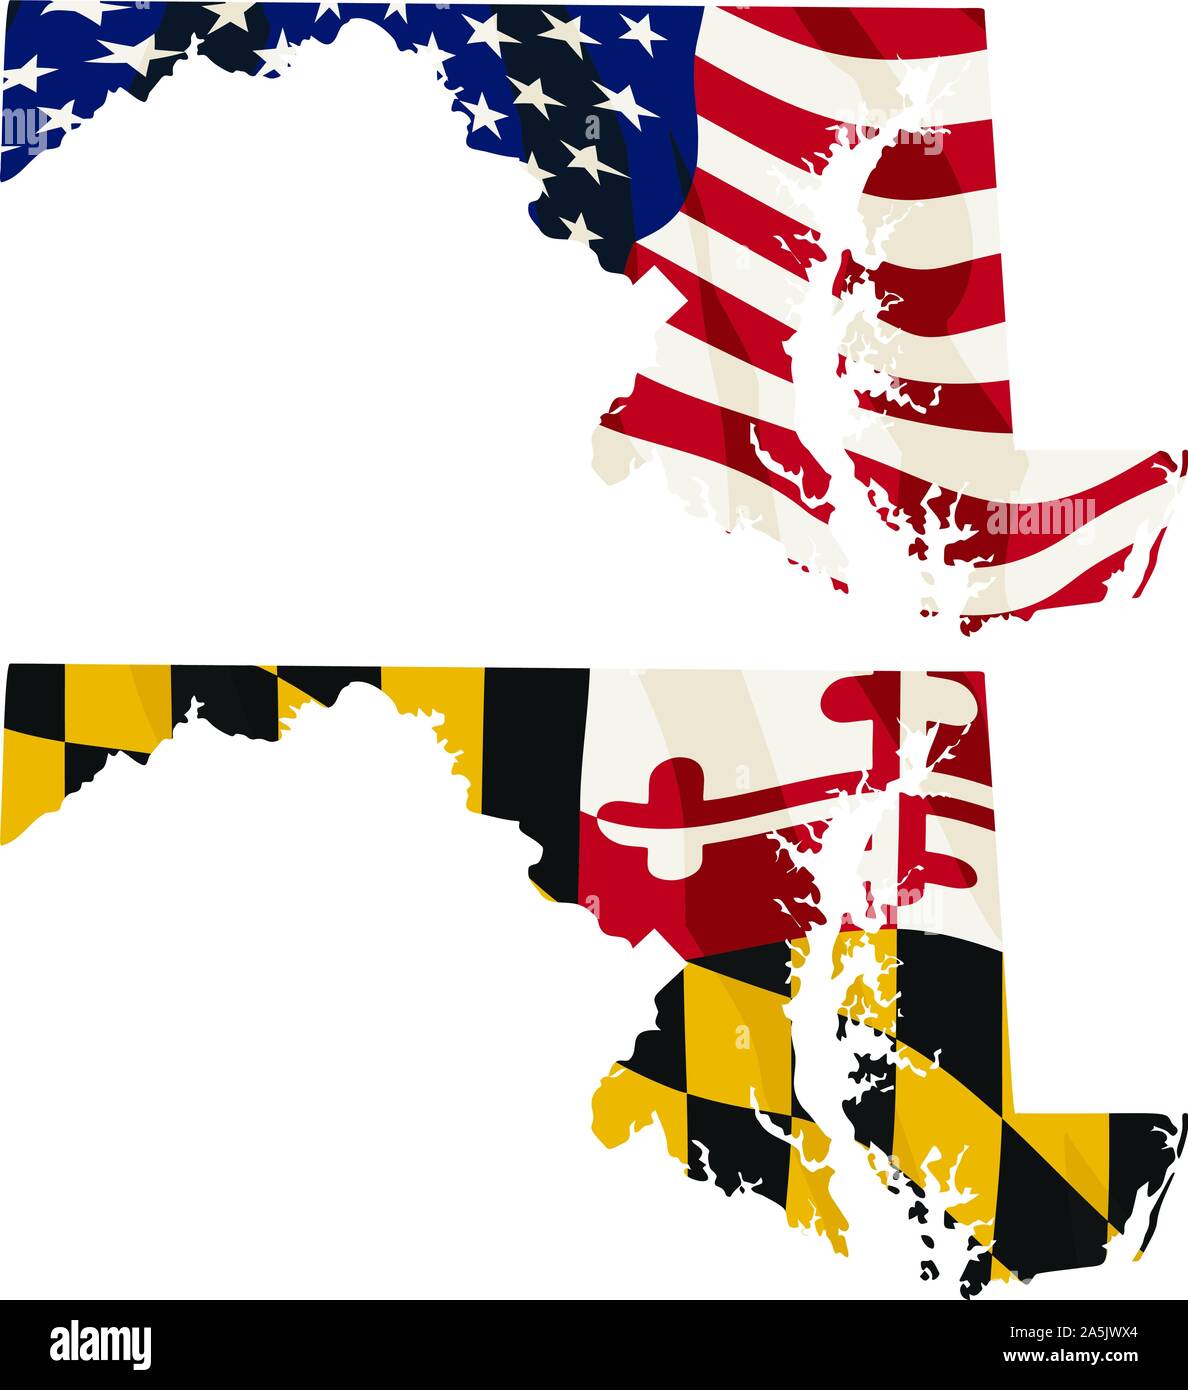 Maryland with USA flag and Maryland flag embedded isolated vector illustration Stock Vector